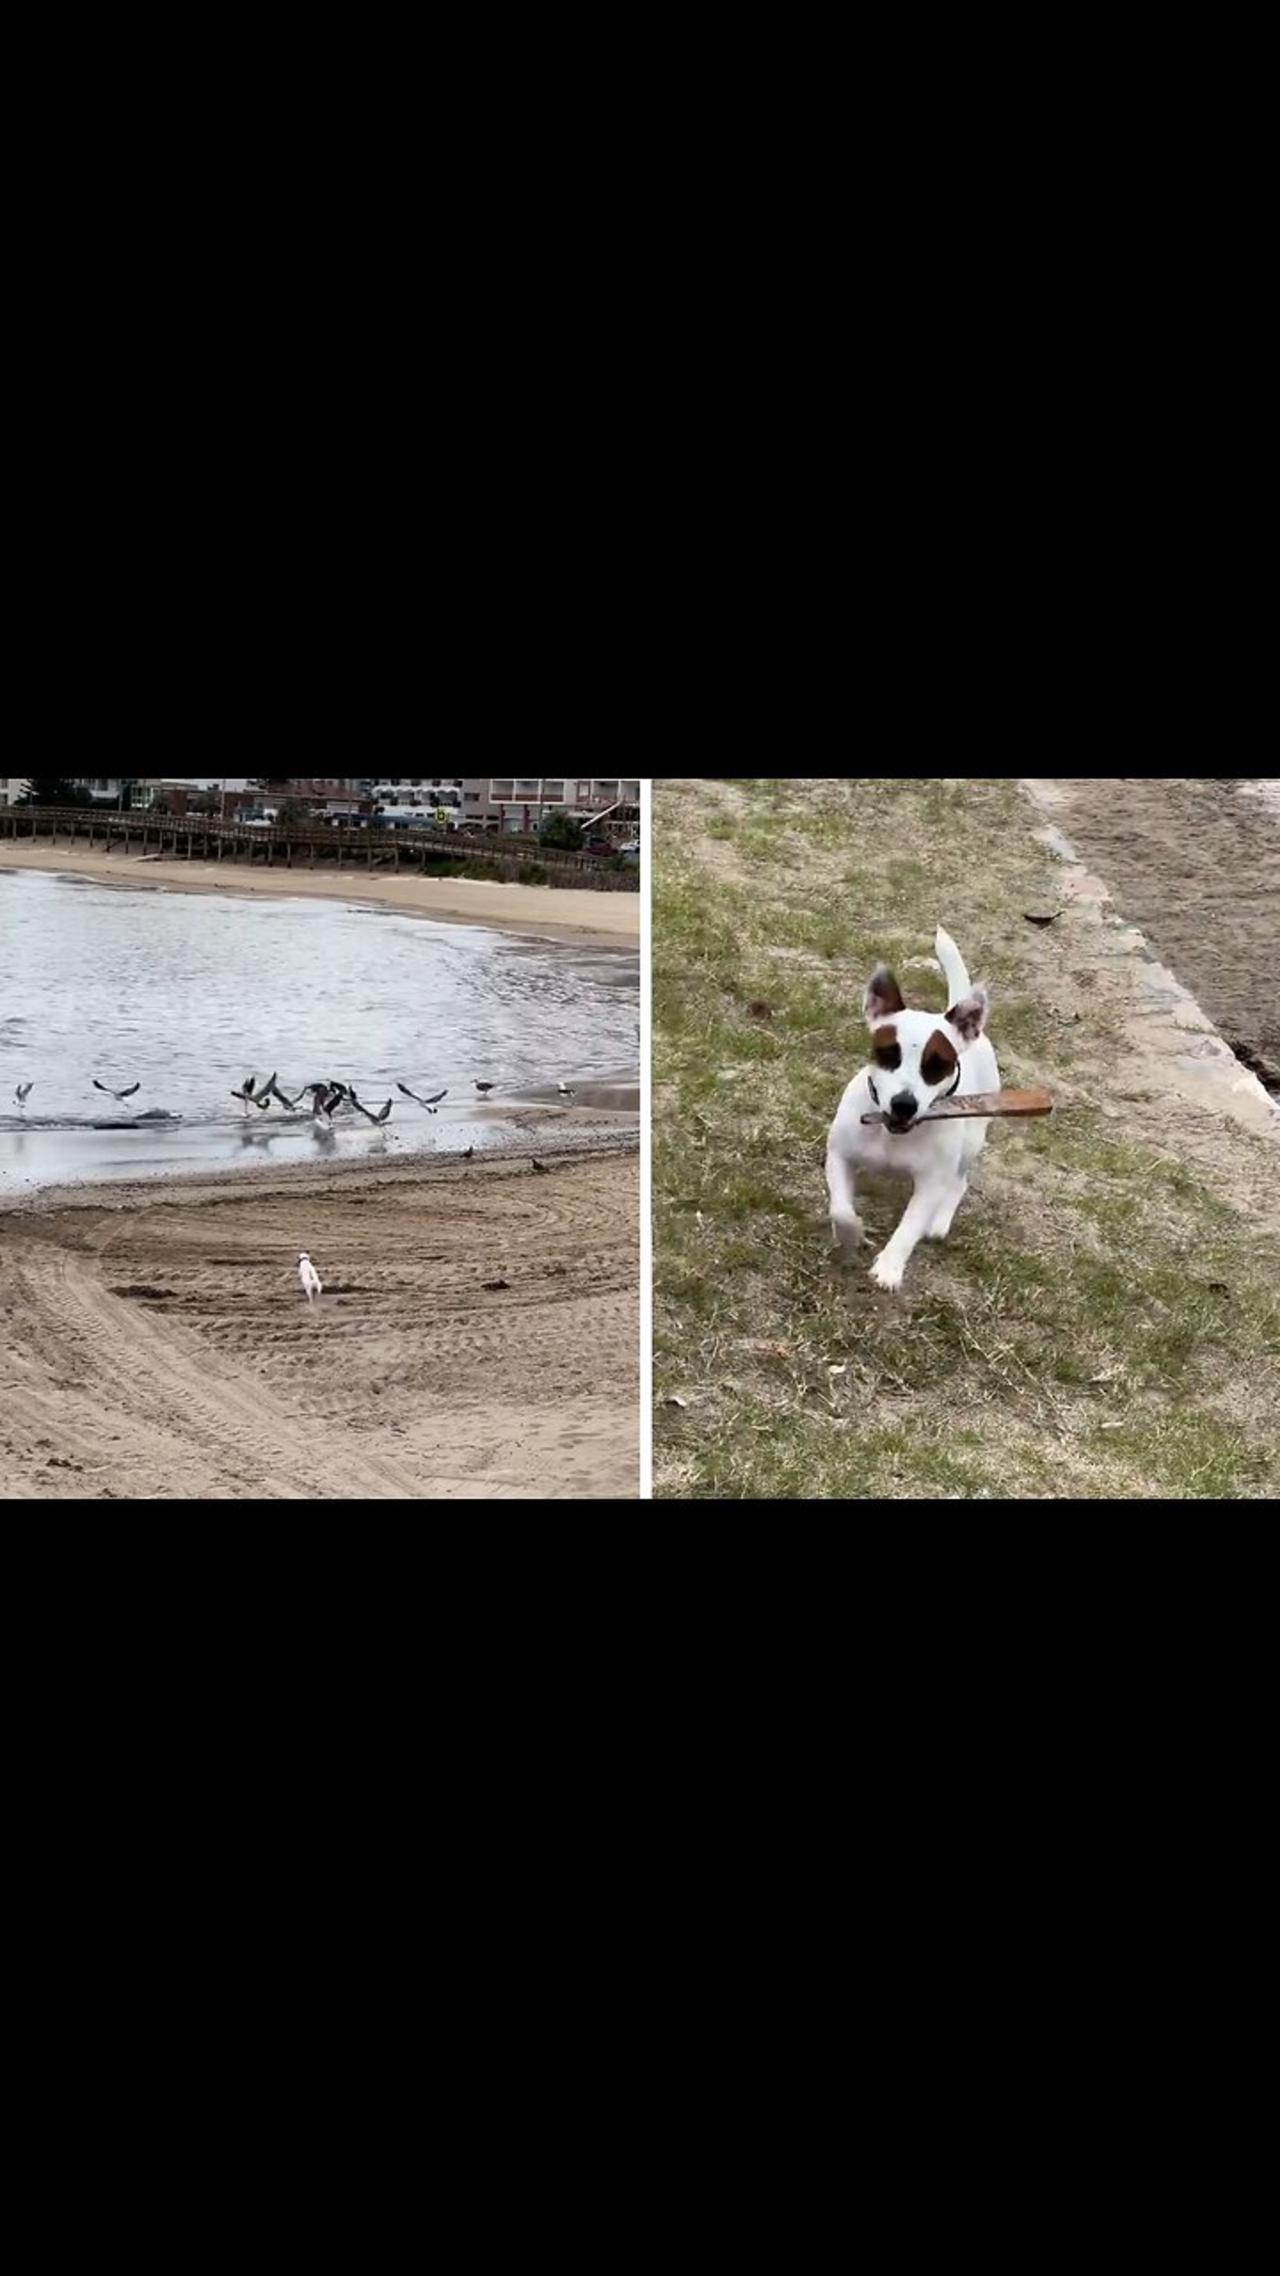 Jack Russell goes on an epic bird-chasing adventure